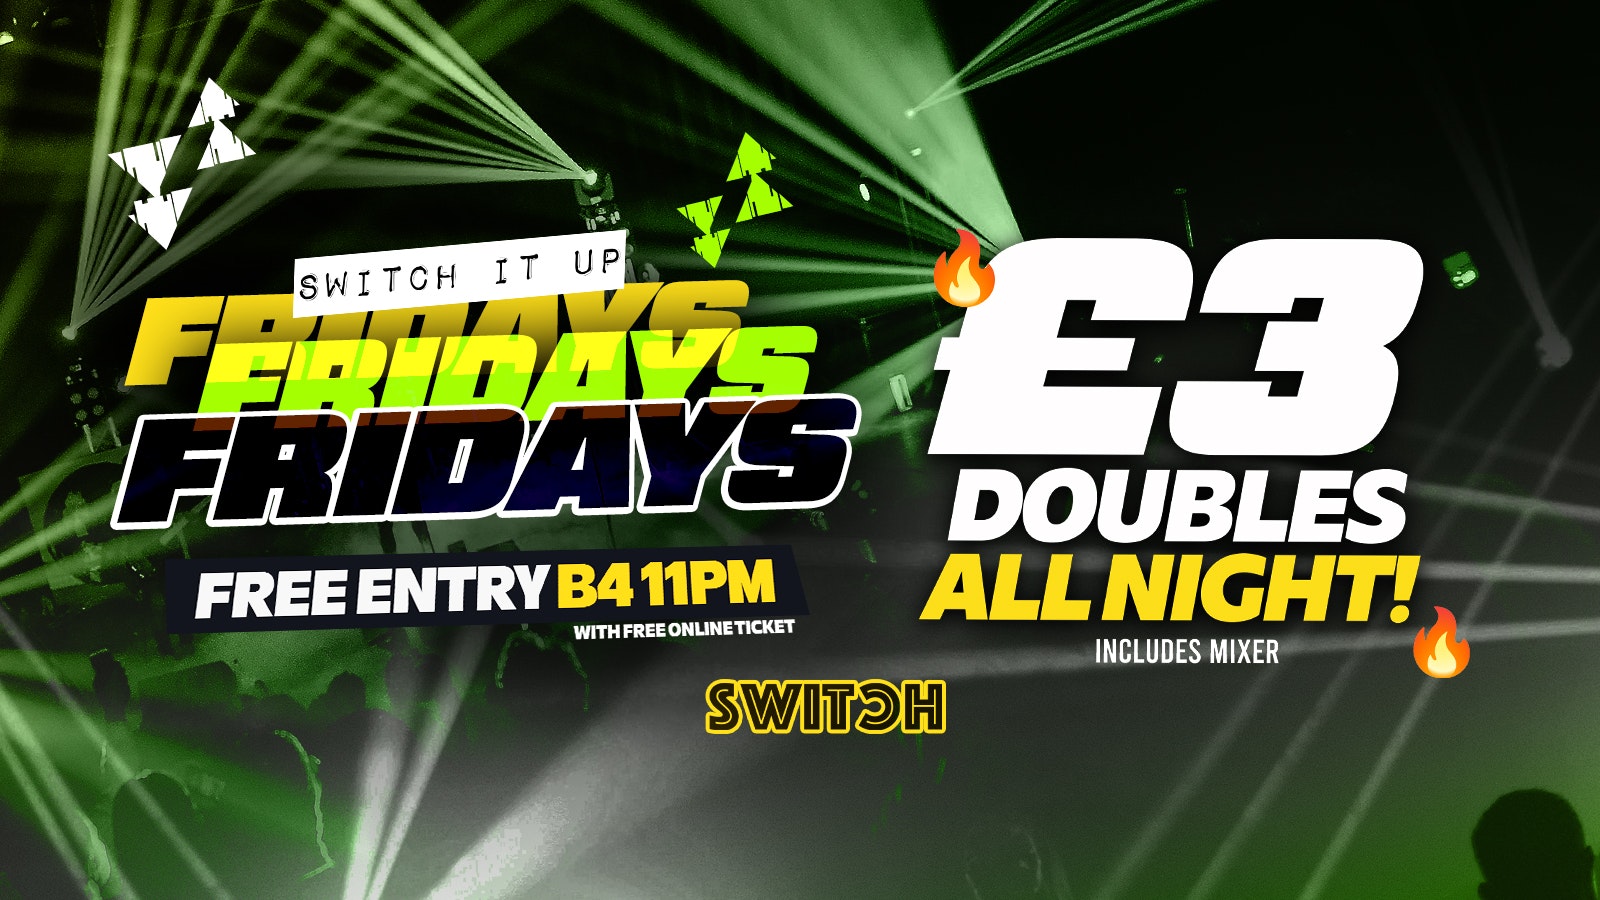 Fridays @ SWITCH | £3 Doubles ALL NIGHT